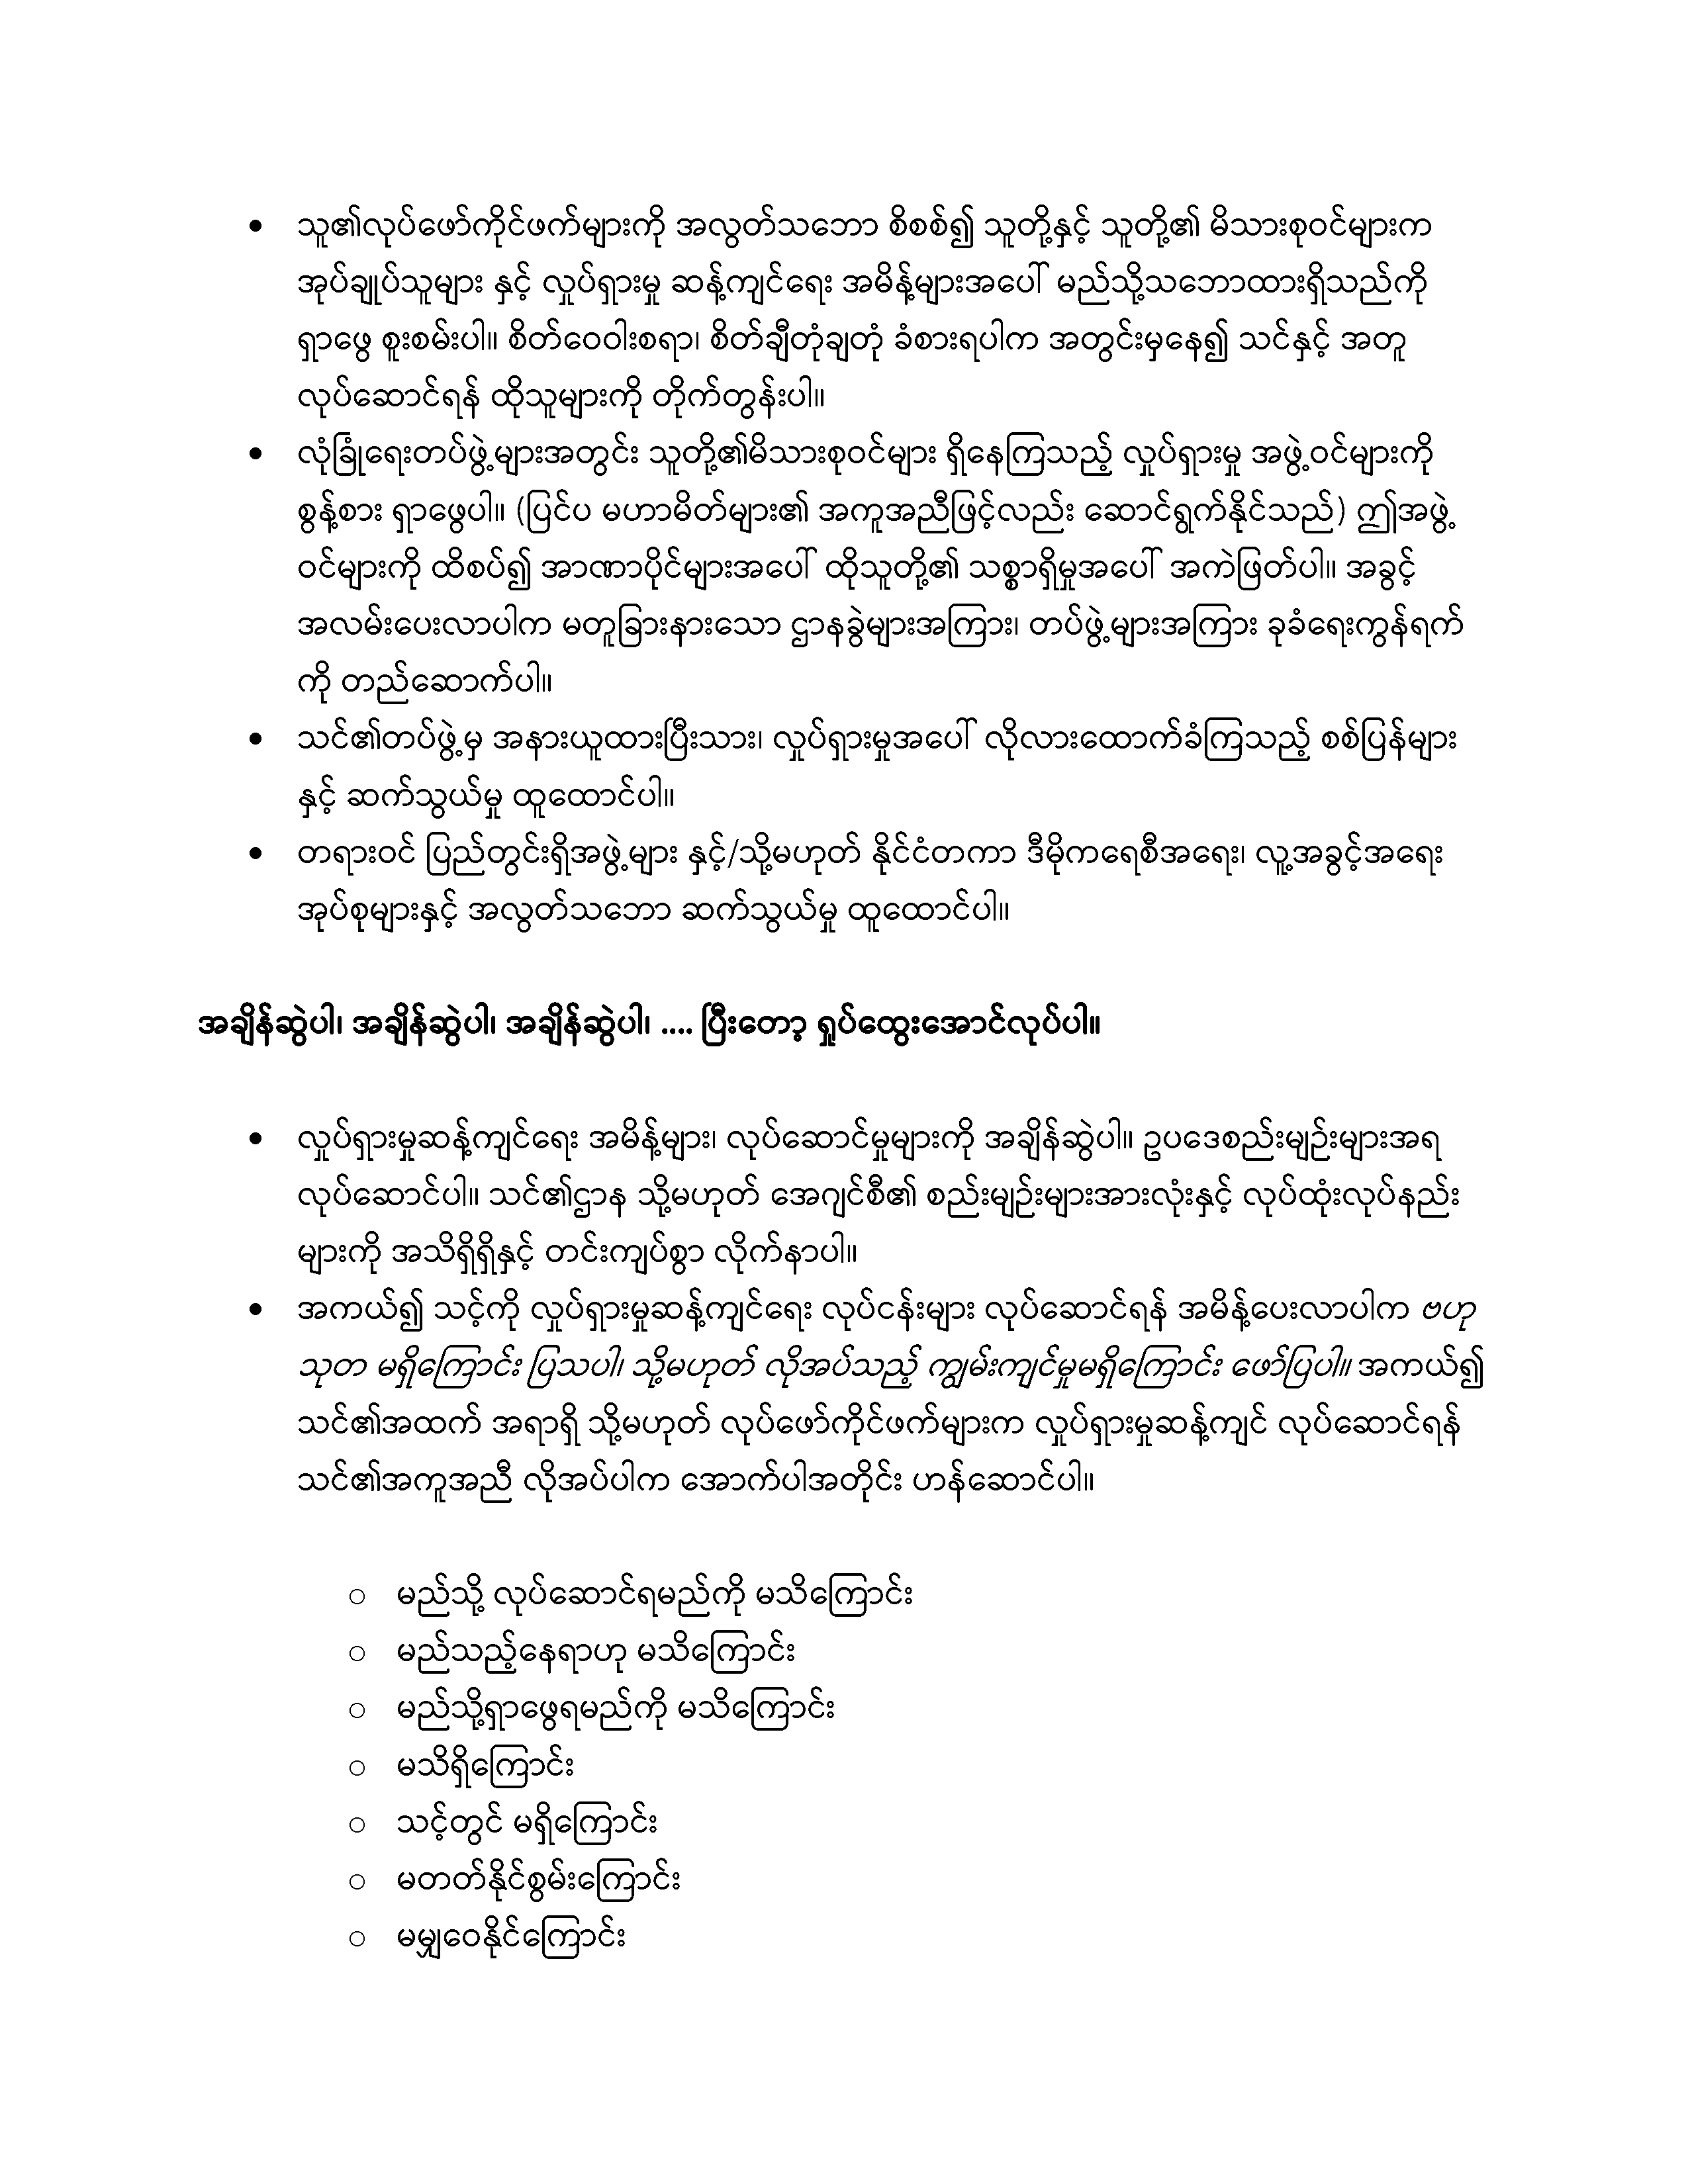 For Members of Security Forces: A Guide to Supporting Pro-Democracy Movements (Burmese)